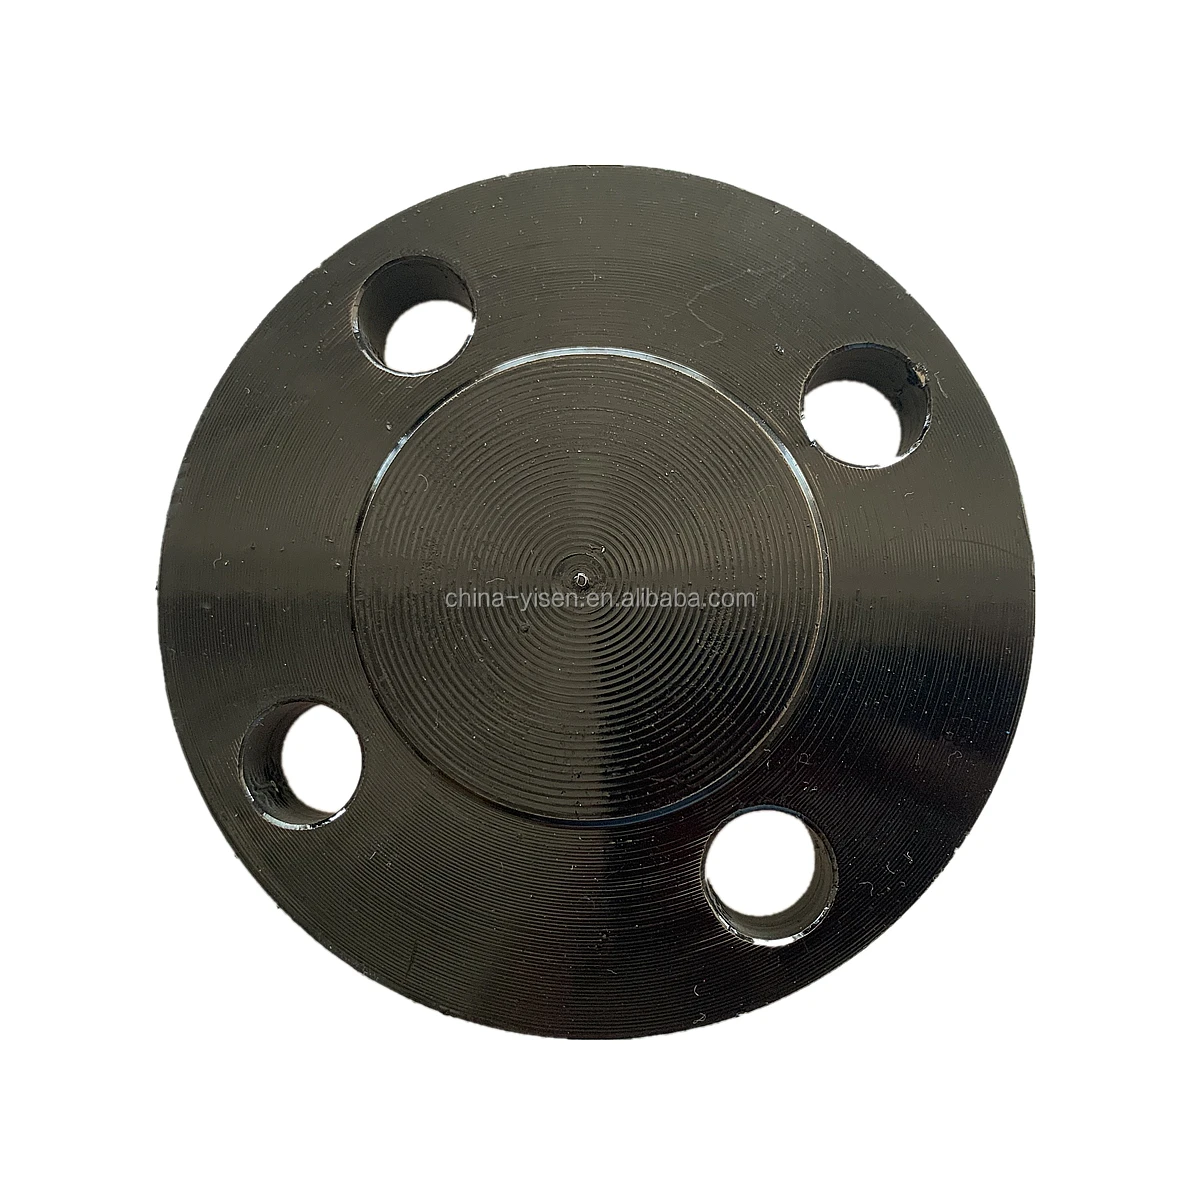 Ansi B165 Cl600 Forged Flanges Stainless Steel Aisi 316316l Blind Flangepipe Fitting Buy 0817